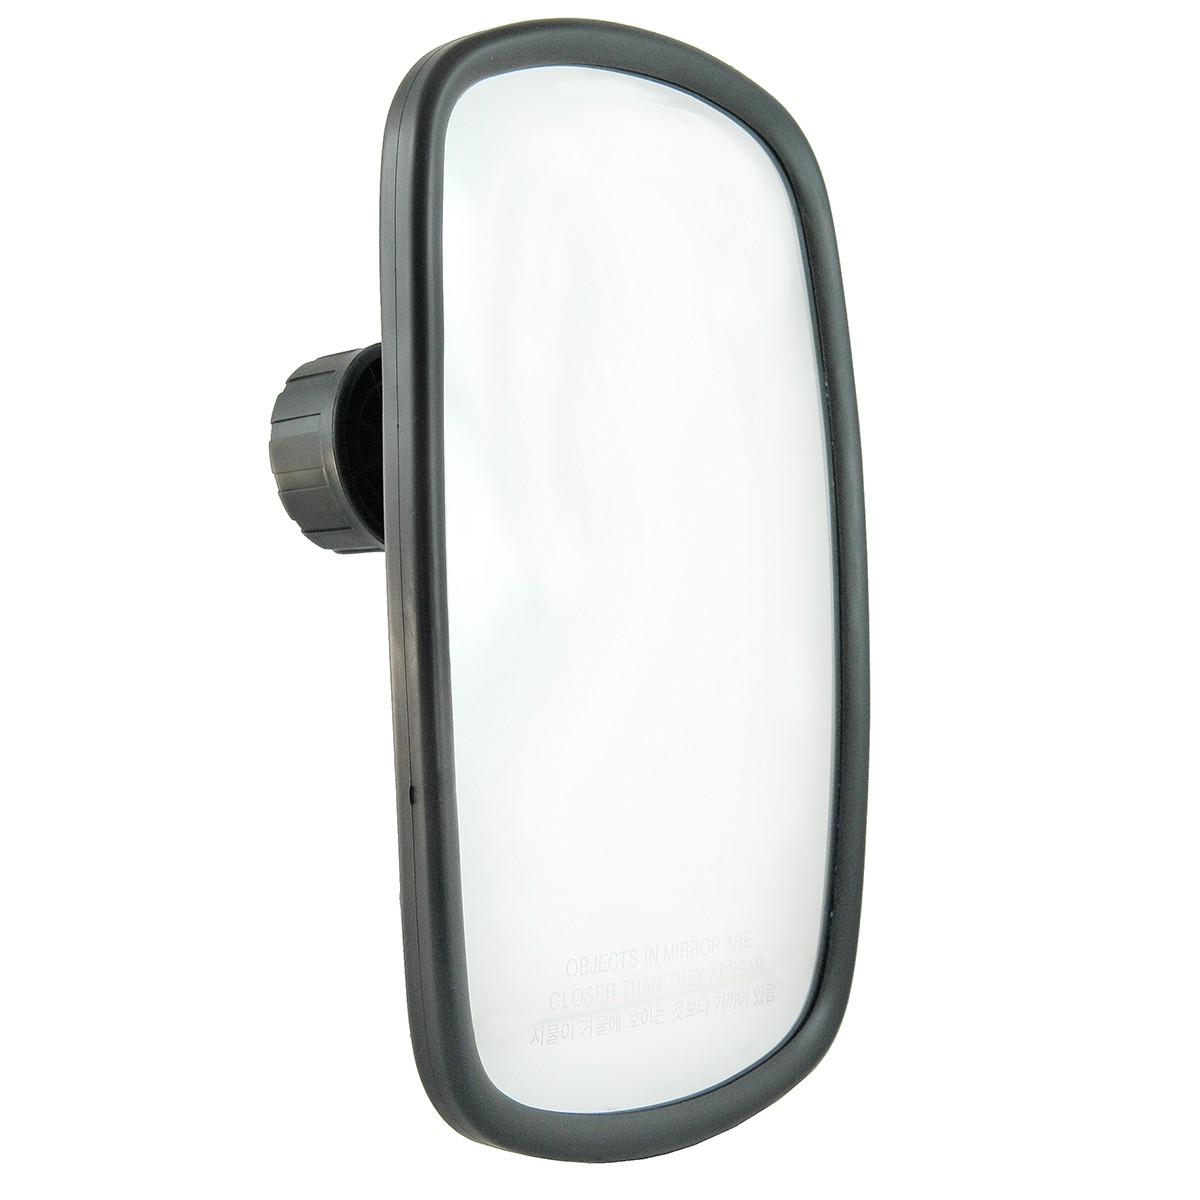 Side mirror / LS i28 / LS R28 i / LS MT3.35 / LS MT3.40 / LS MT3.50 / LS MT3.60 / TRG920 / A1920070 / 40007650